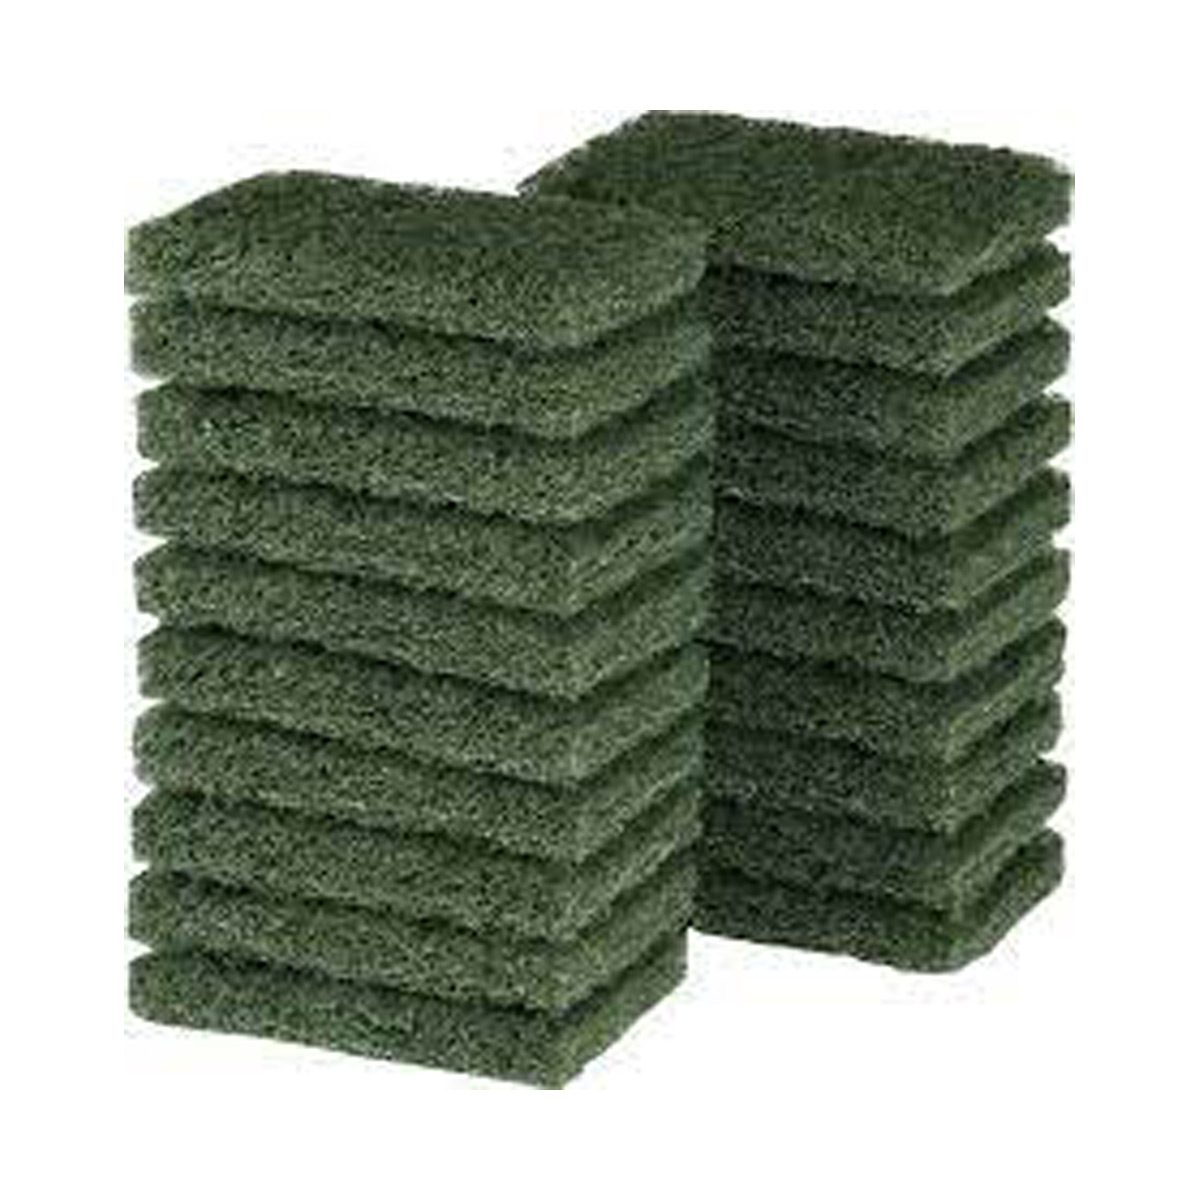 cleaning-equipment-cloths-scourers-wipes-green-thickline-hand-pads-10pk-best-on-tiles-and-grout-vjs-distributors-DOODG